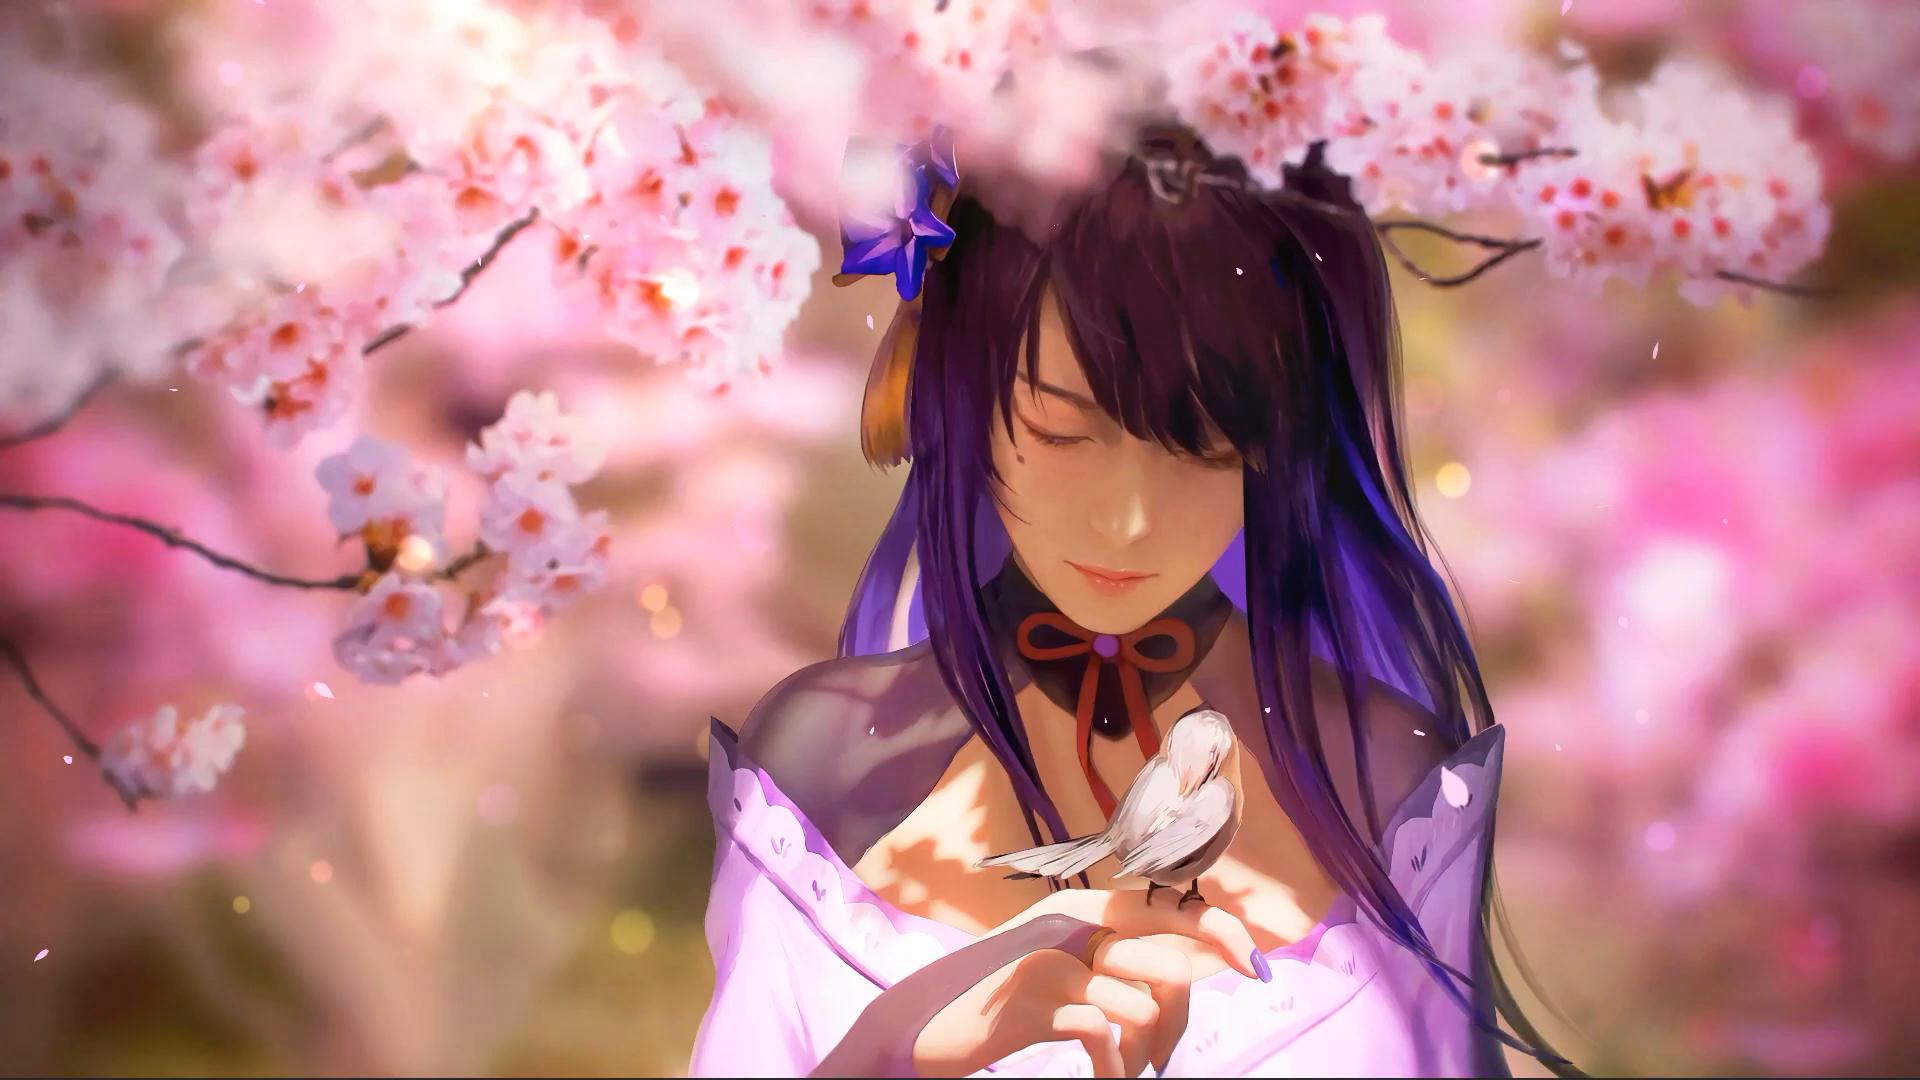 Beautiful Cherry Blossom with anime girl! by Coaster3002 on DeviantArt